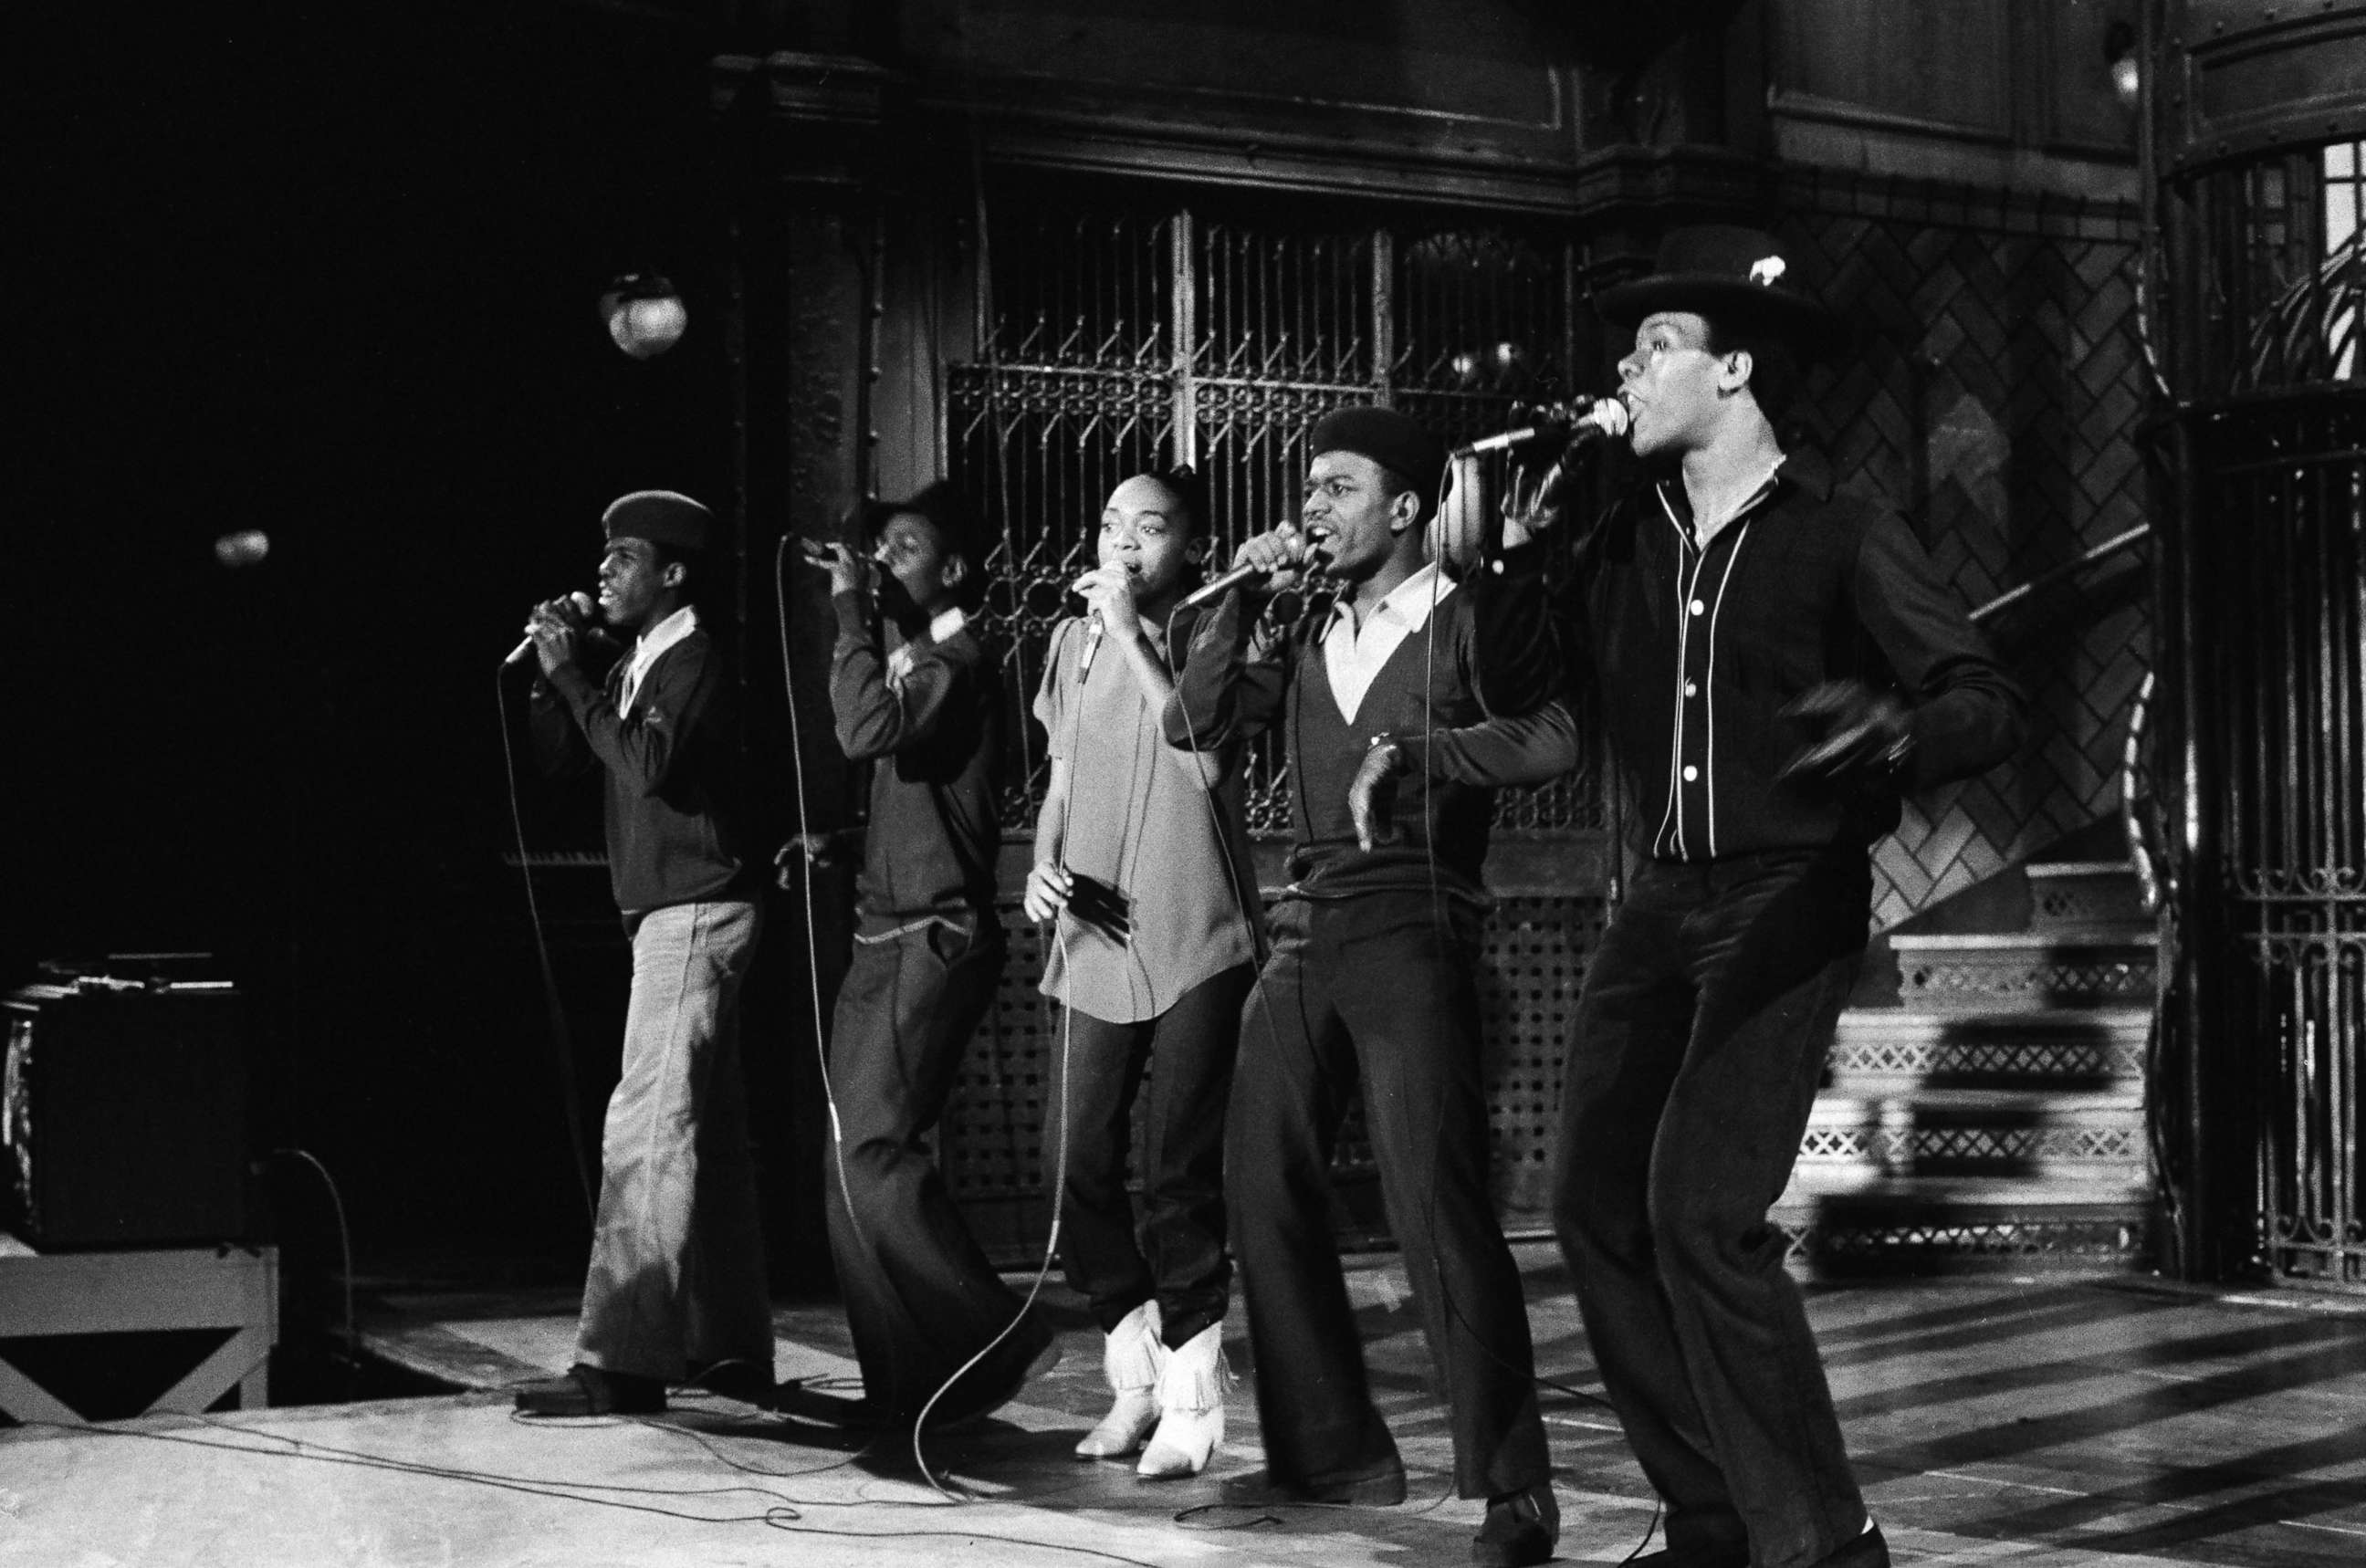 PHOTO: Funky 4 + 1 More during the musical performance, Feb. 14, 1981, on Saturday Night Live.